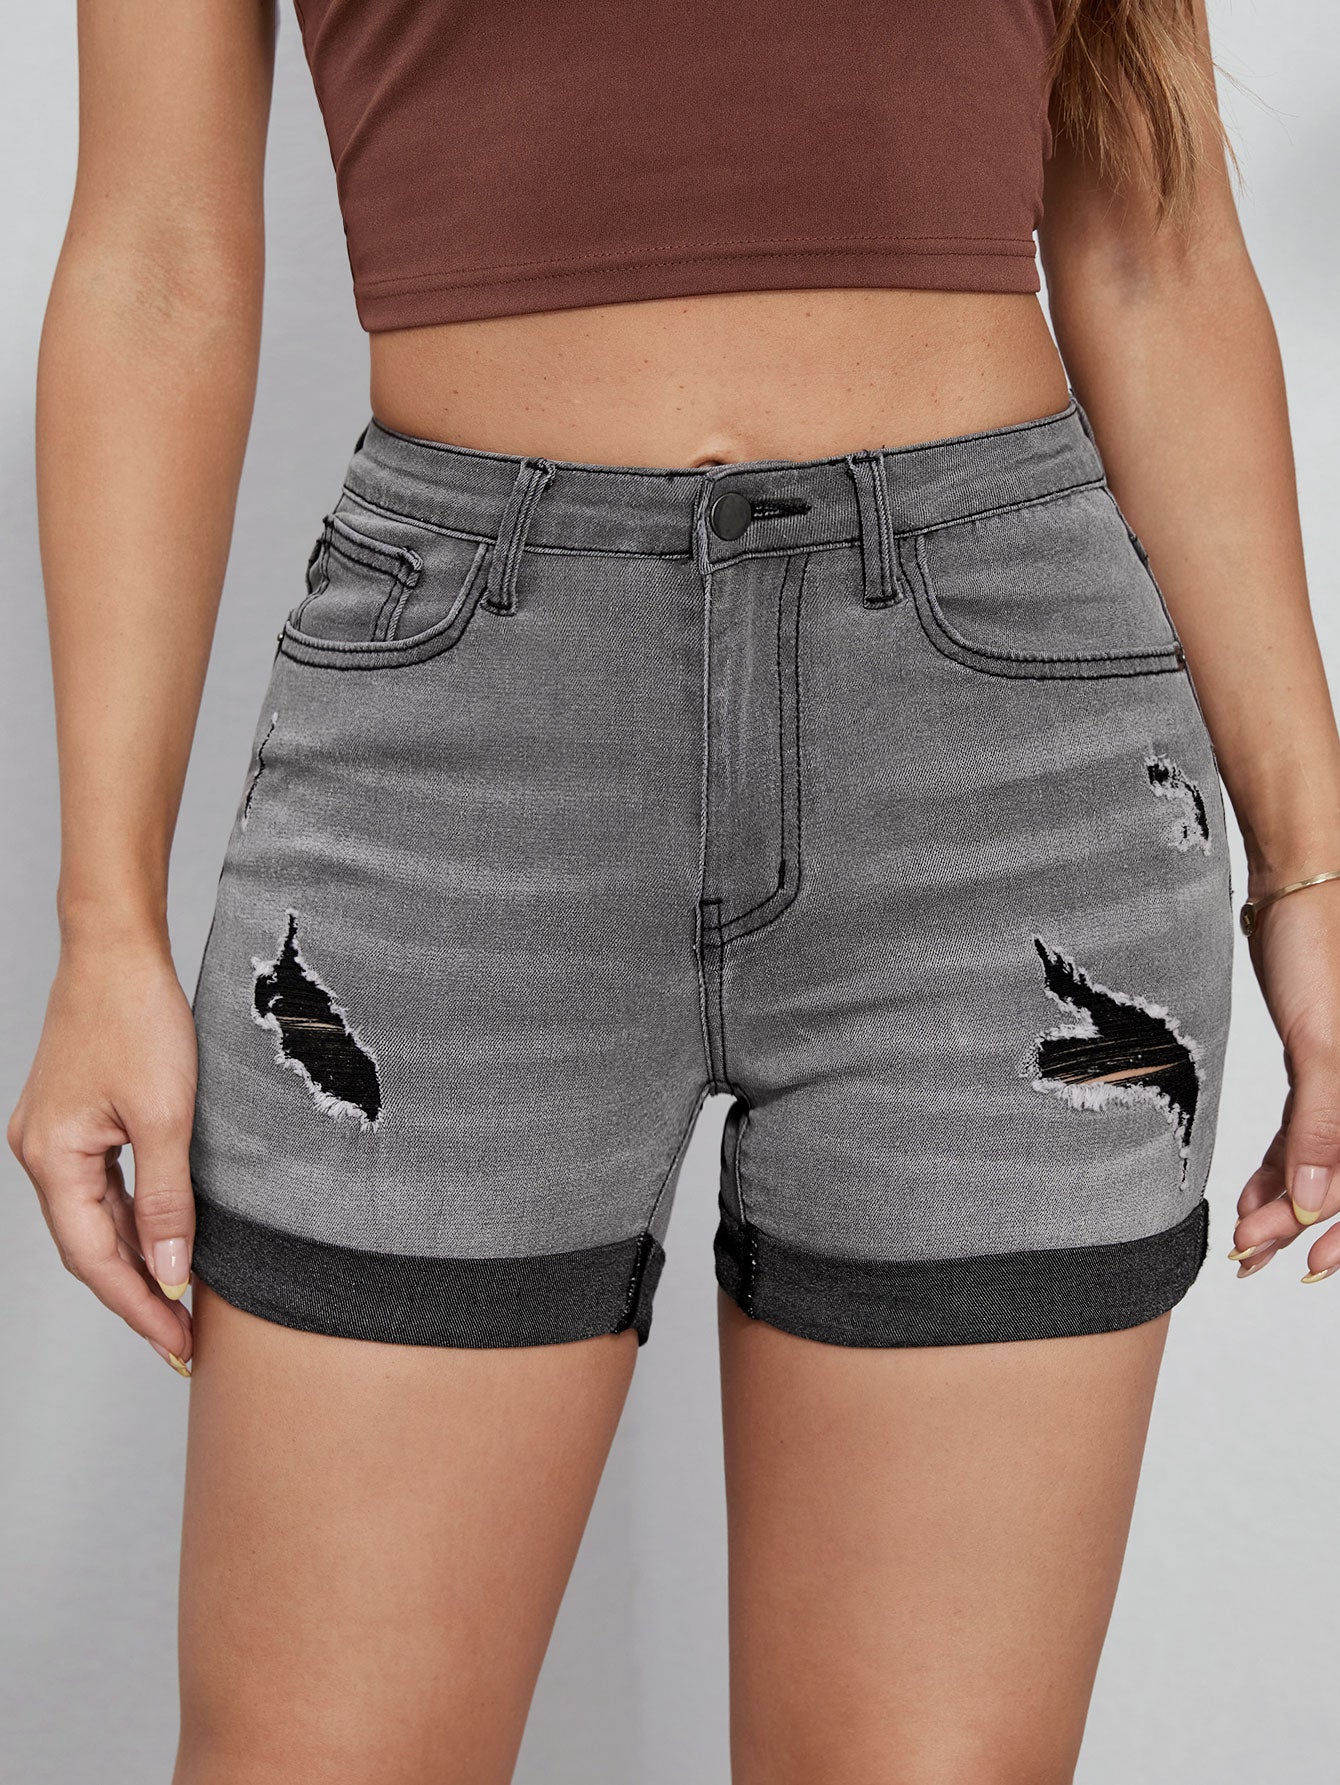 Ellie Cutoff Shorts – The Obsessions Boutique